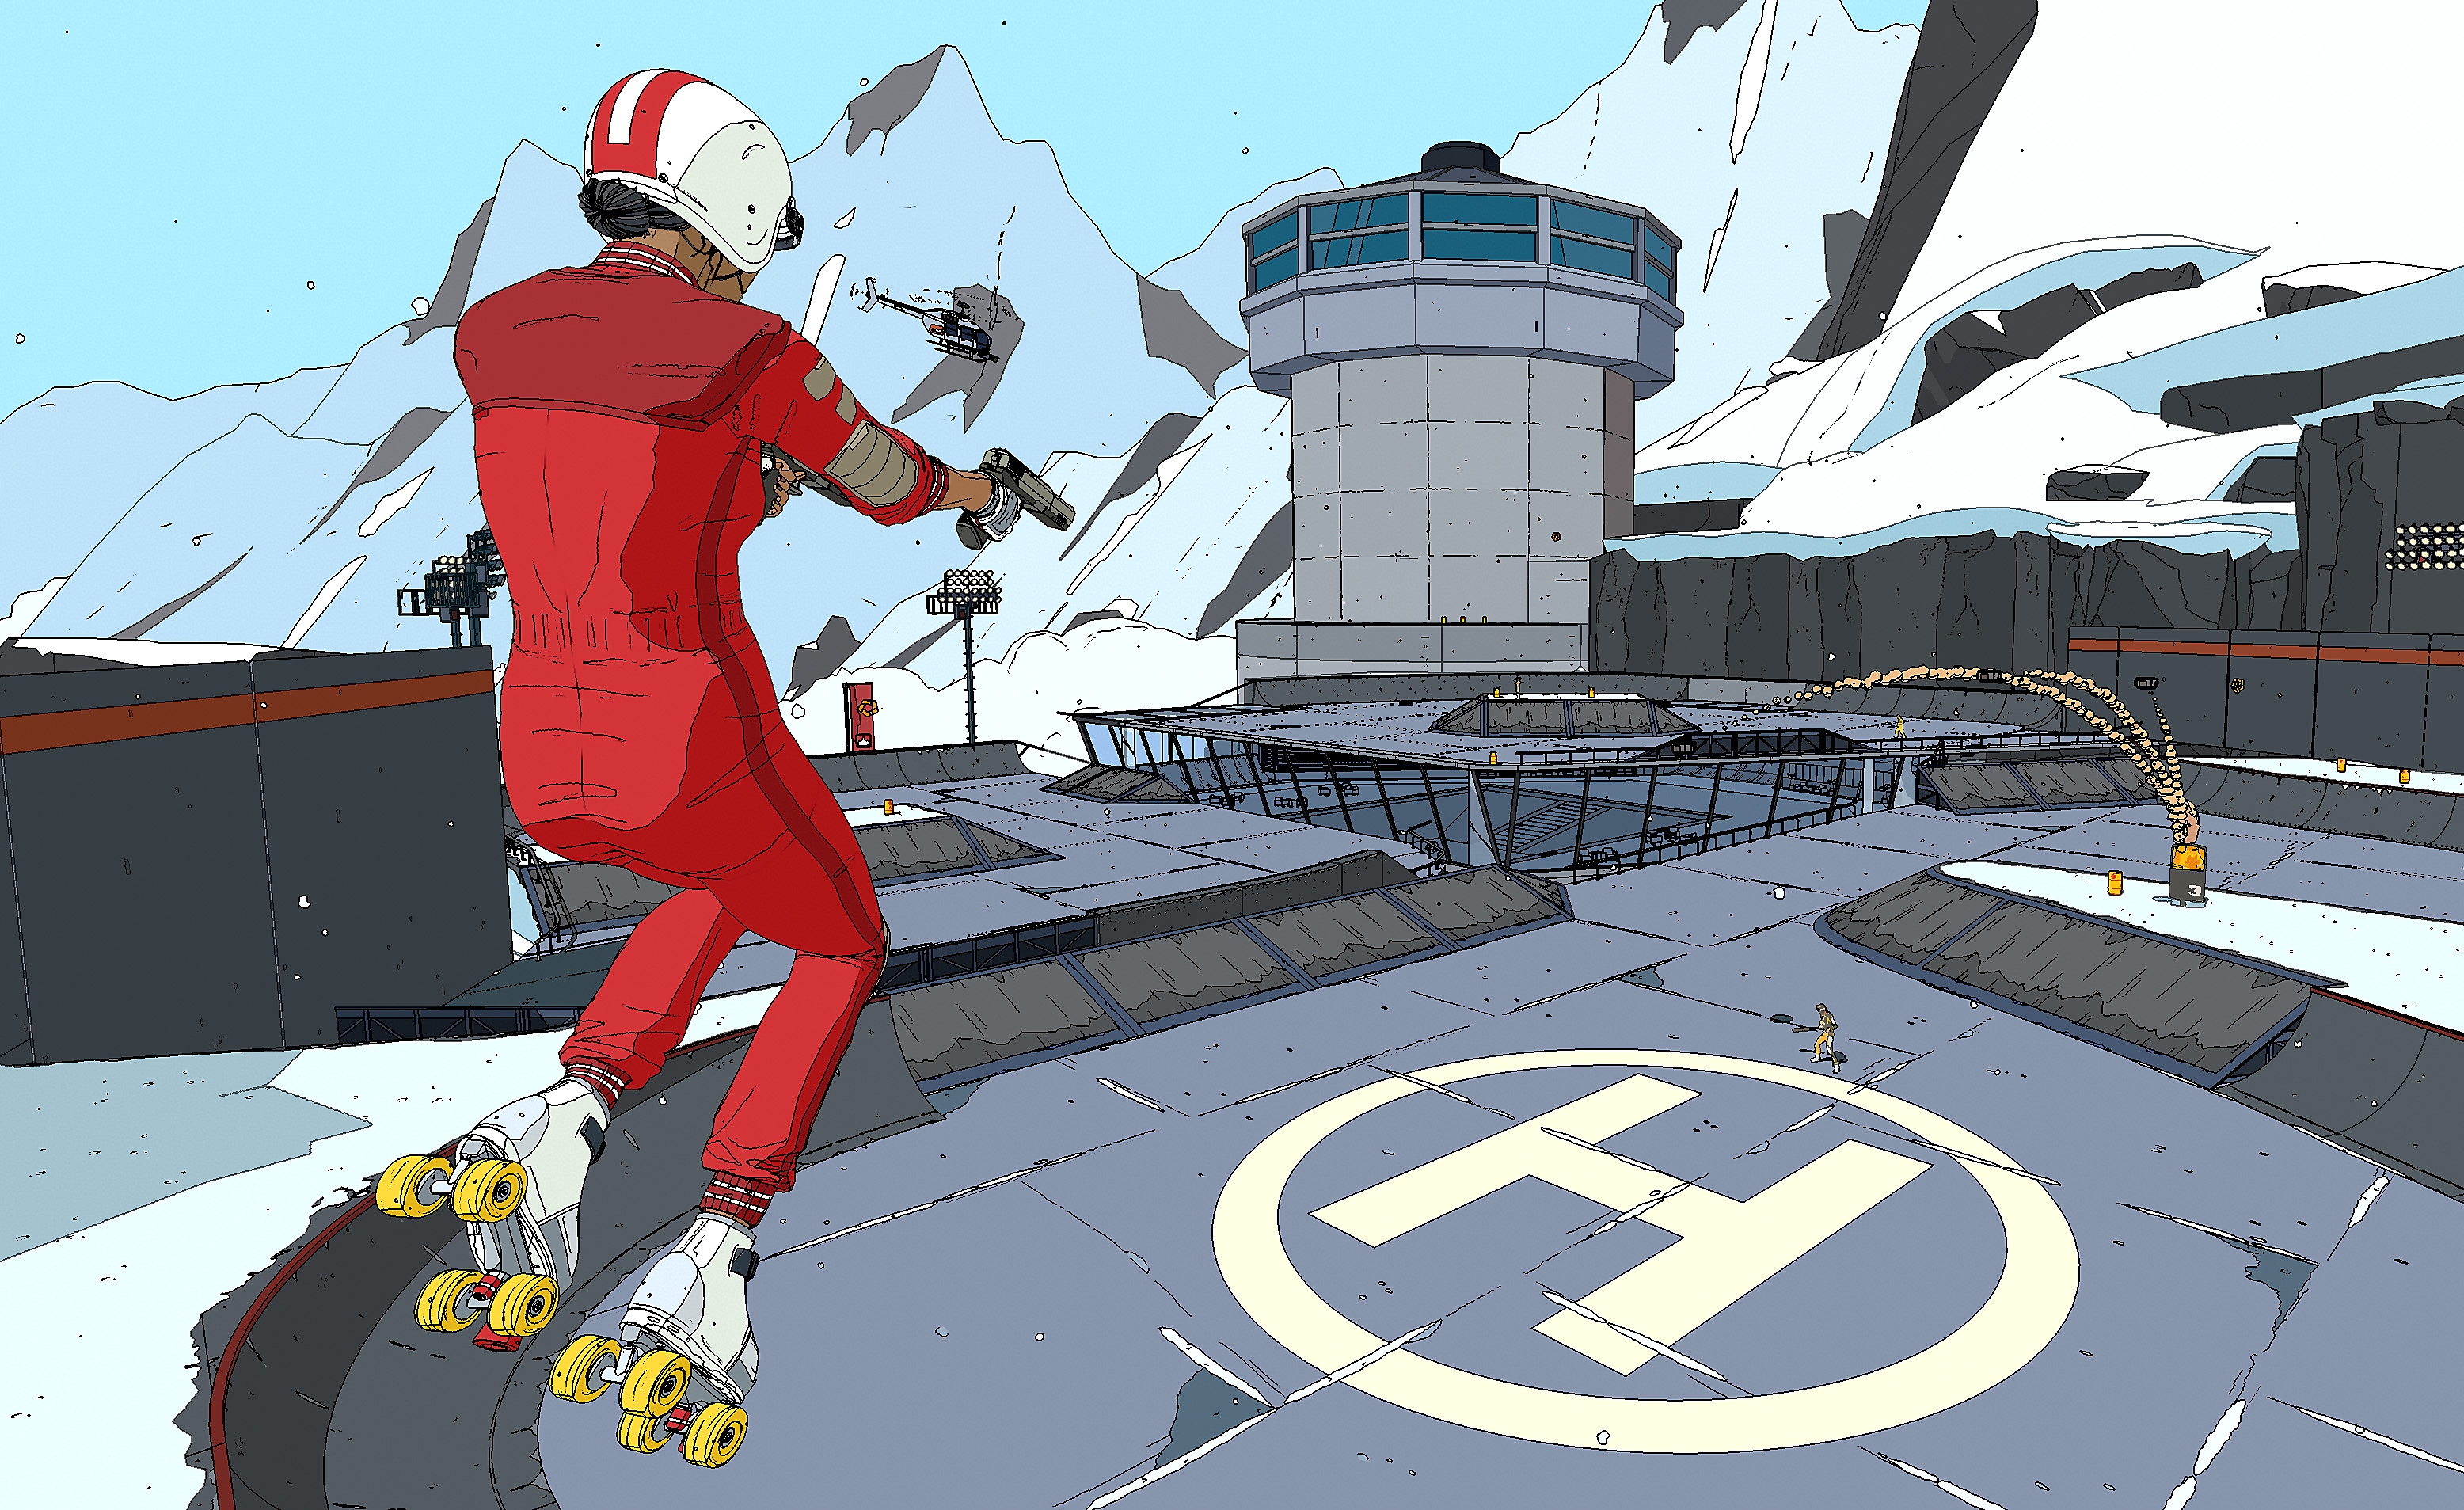 Rollerdrome screenshot showing the main character flying through the air above a helipad